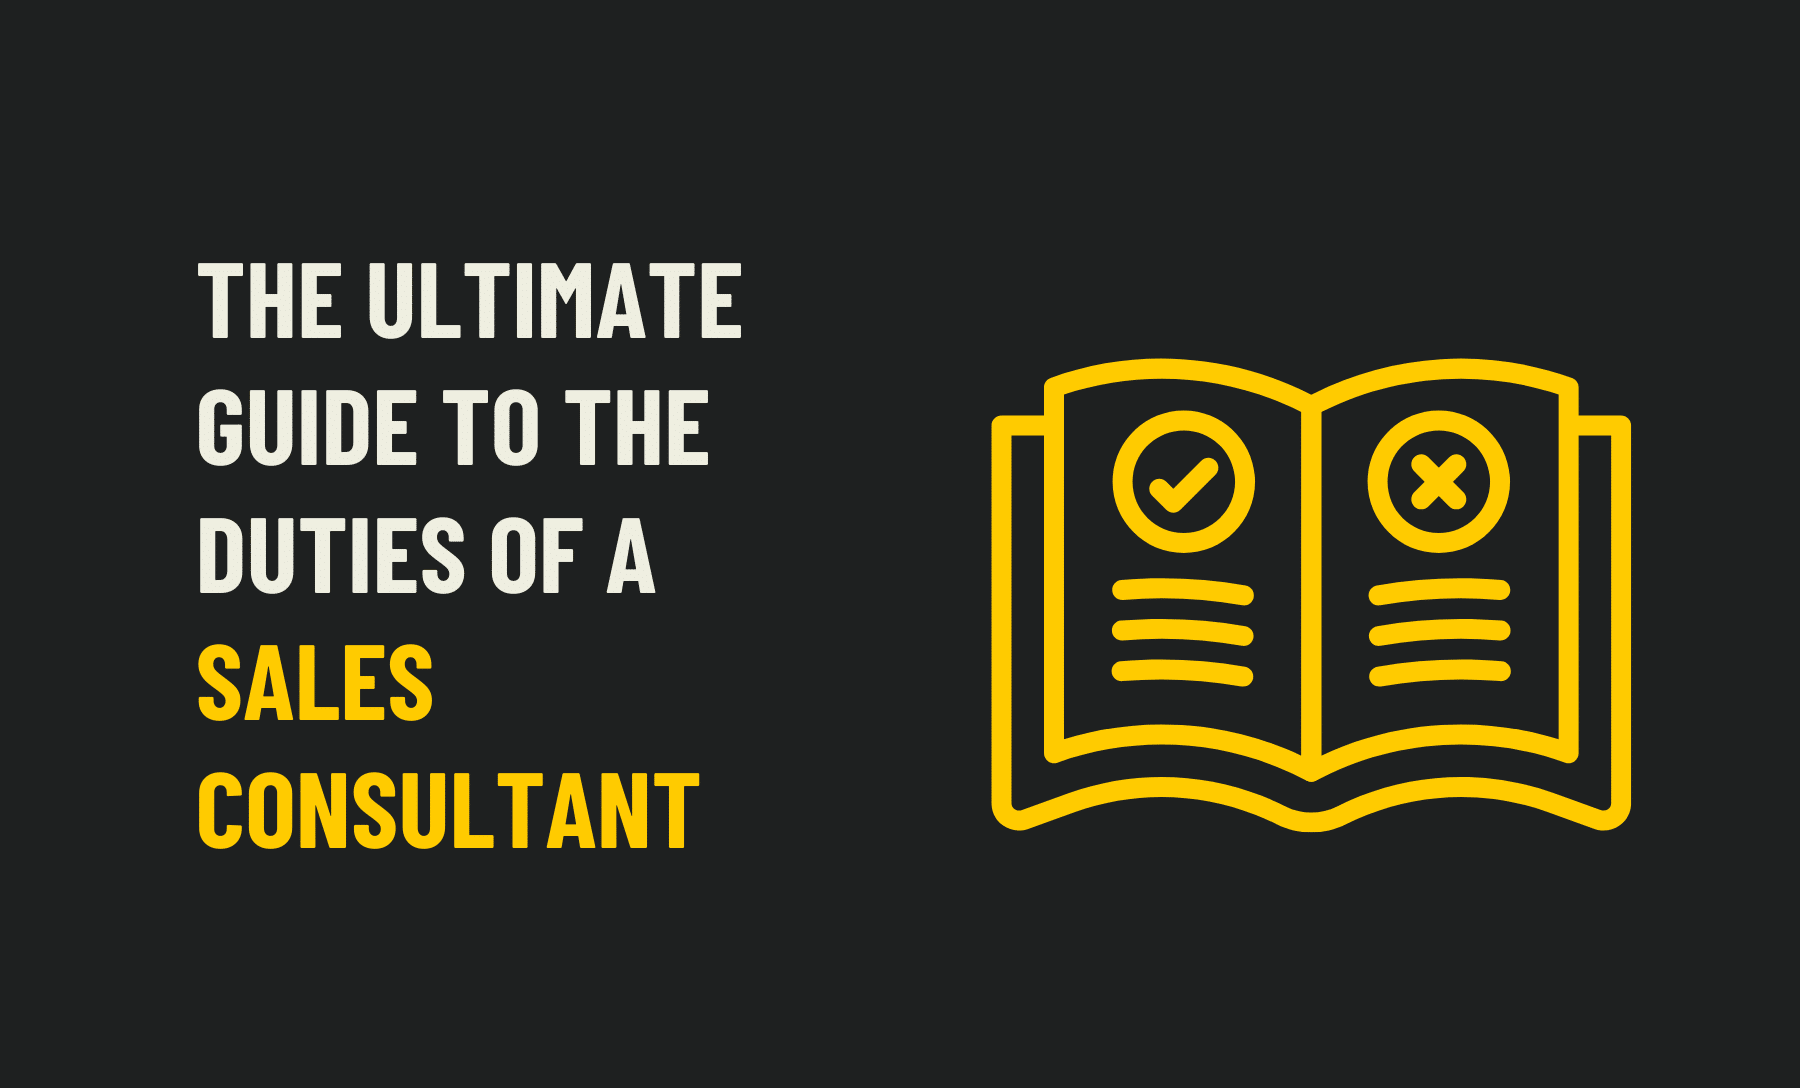 The Ultimate Guide to the Duties of a Sales Consultant